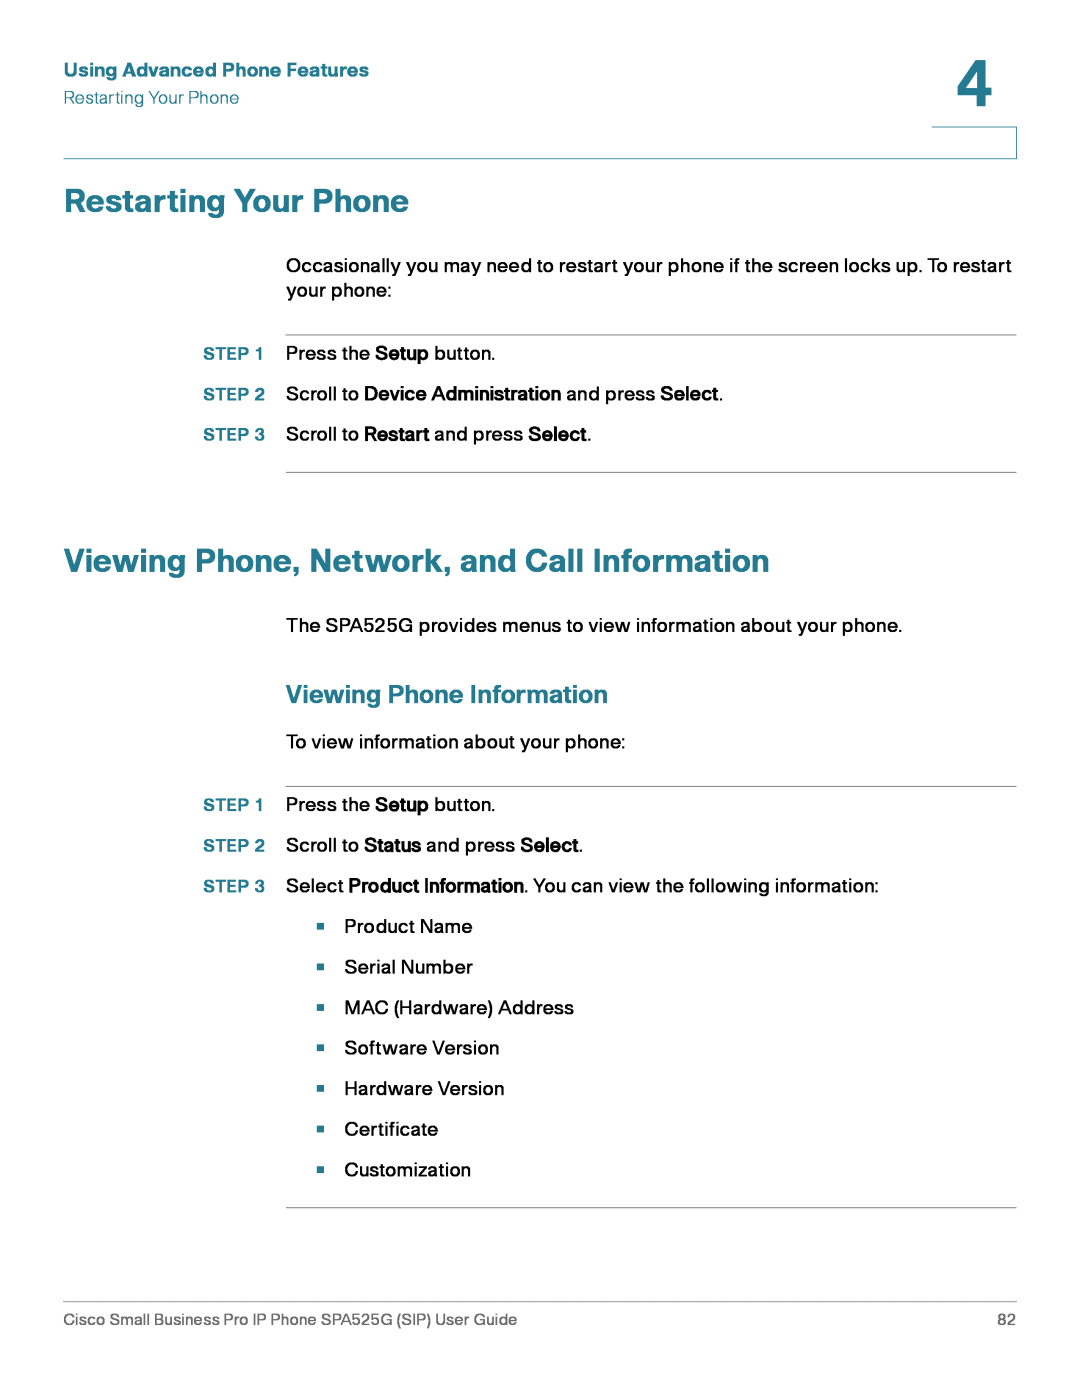 Cisco Systems SPA525G manual Restarting Your Phone, Viewing Phone, Network, and Call Information, Viewing Phone Information 